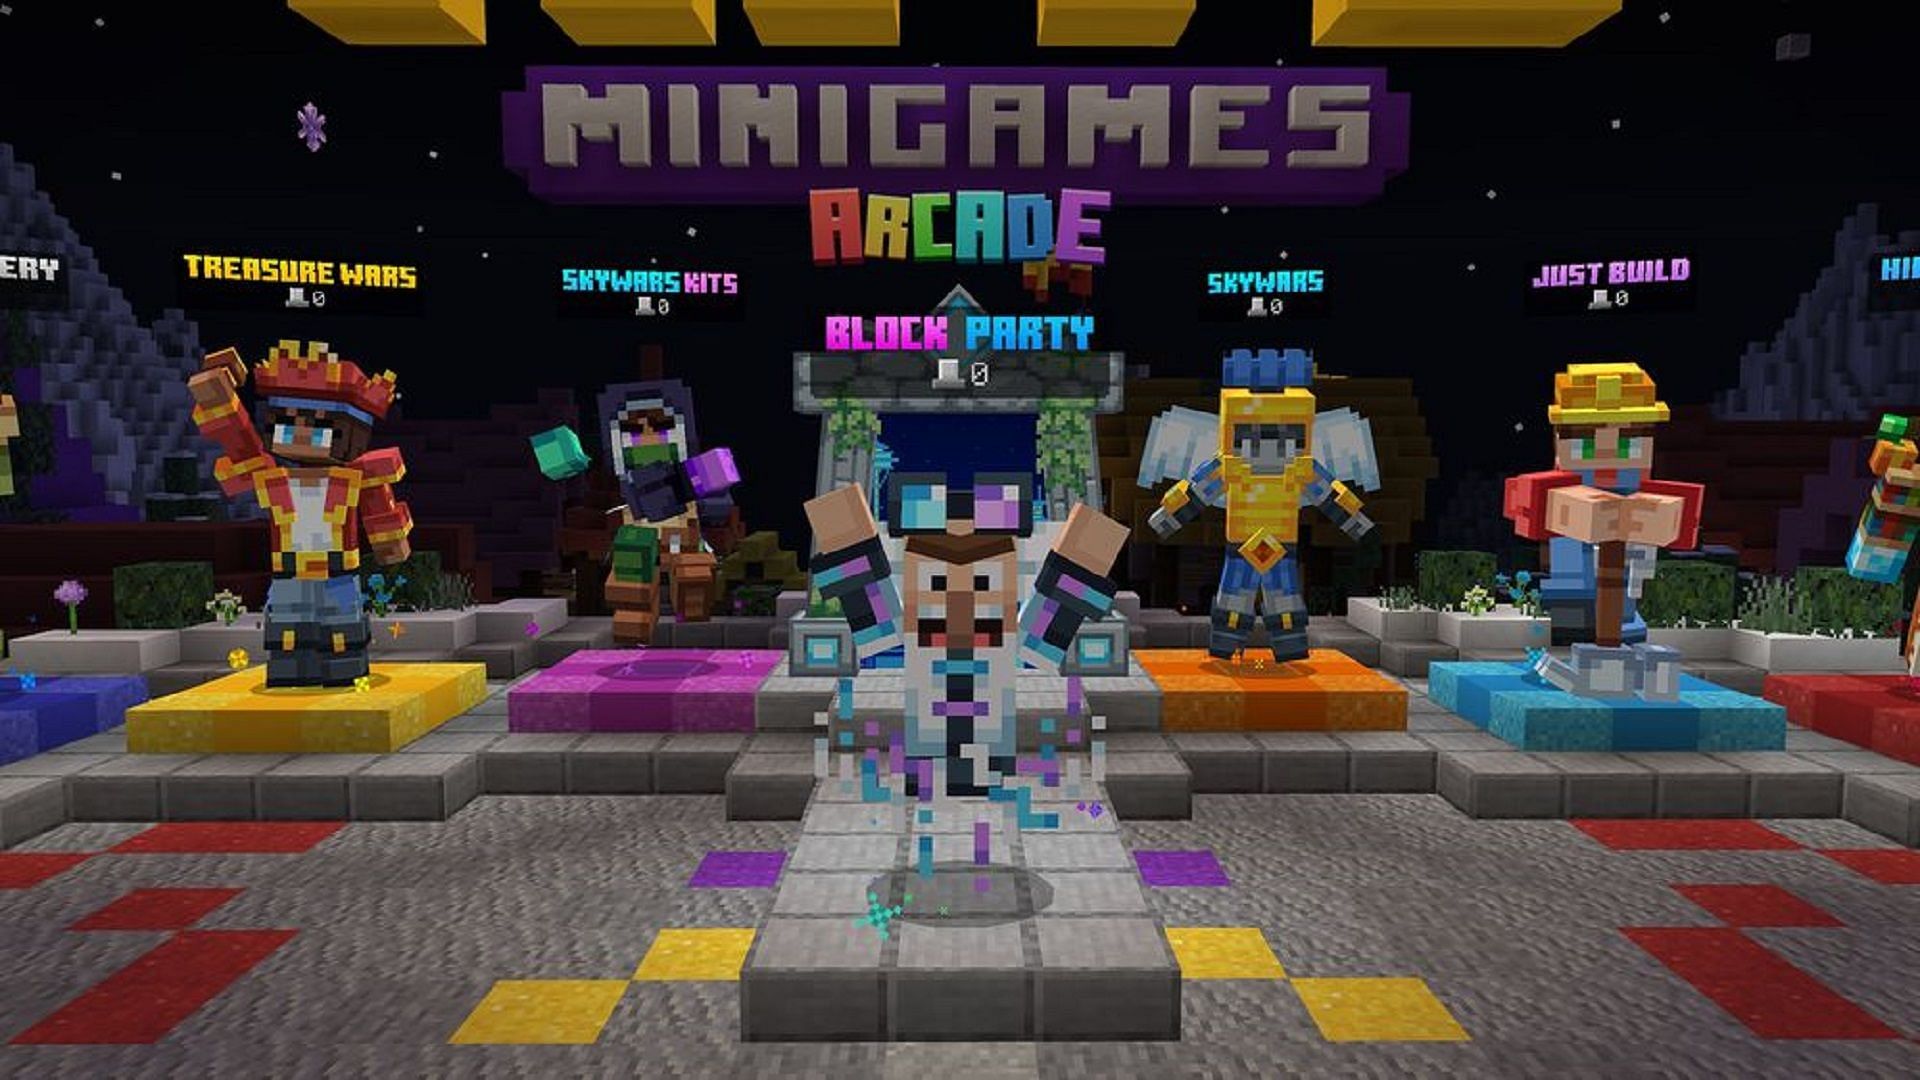 The Hive recently released its own Block Party minigame (Image via HiveMC)